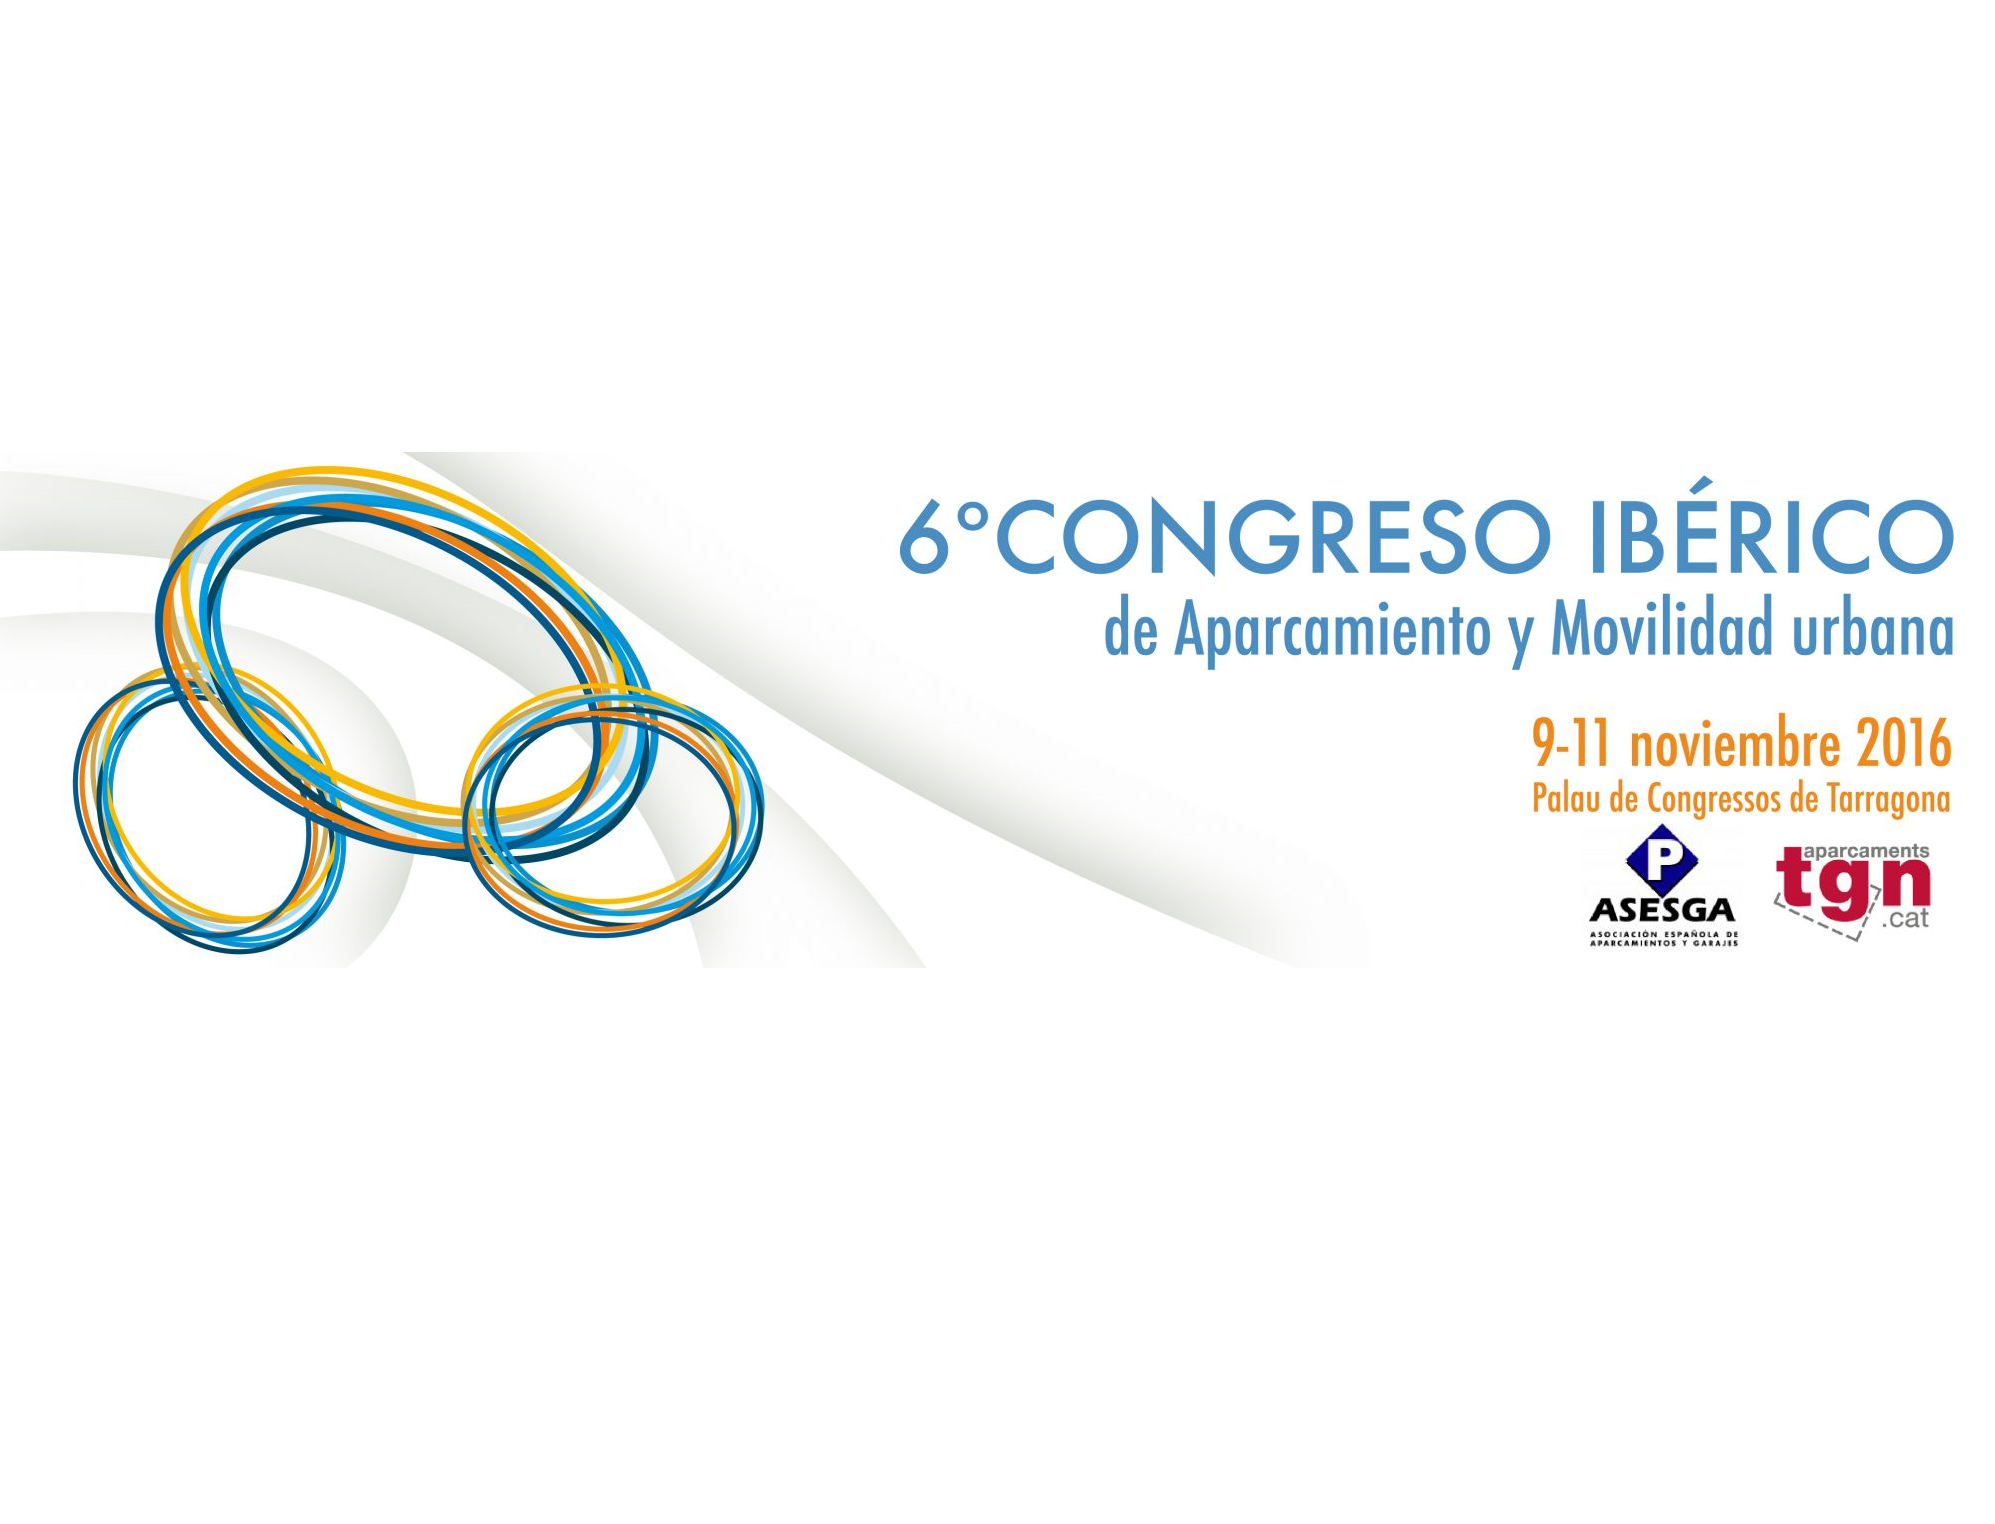 Circontrol will participate in 6th Iberian Conference for Parking and Urban Mobility organized by ASESGA